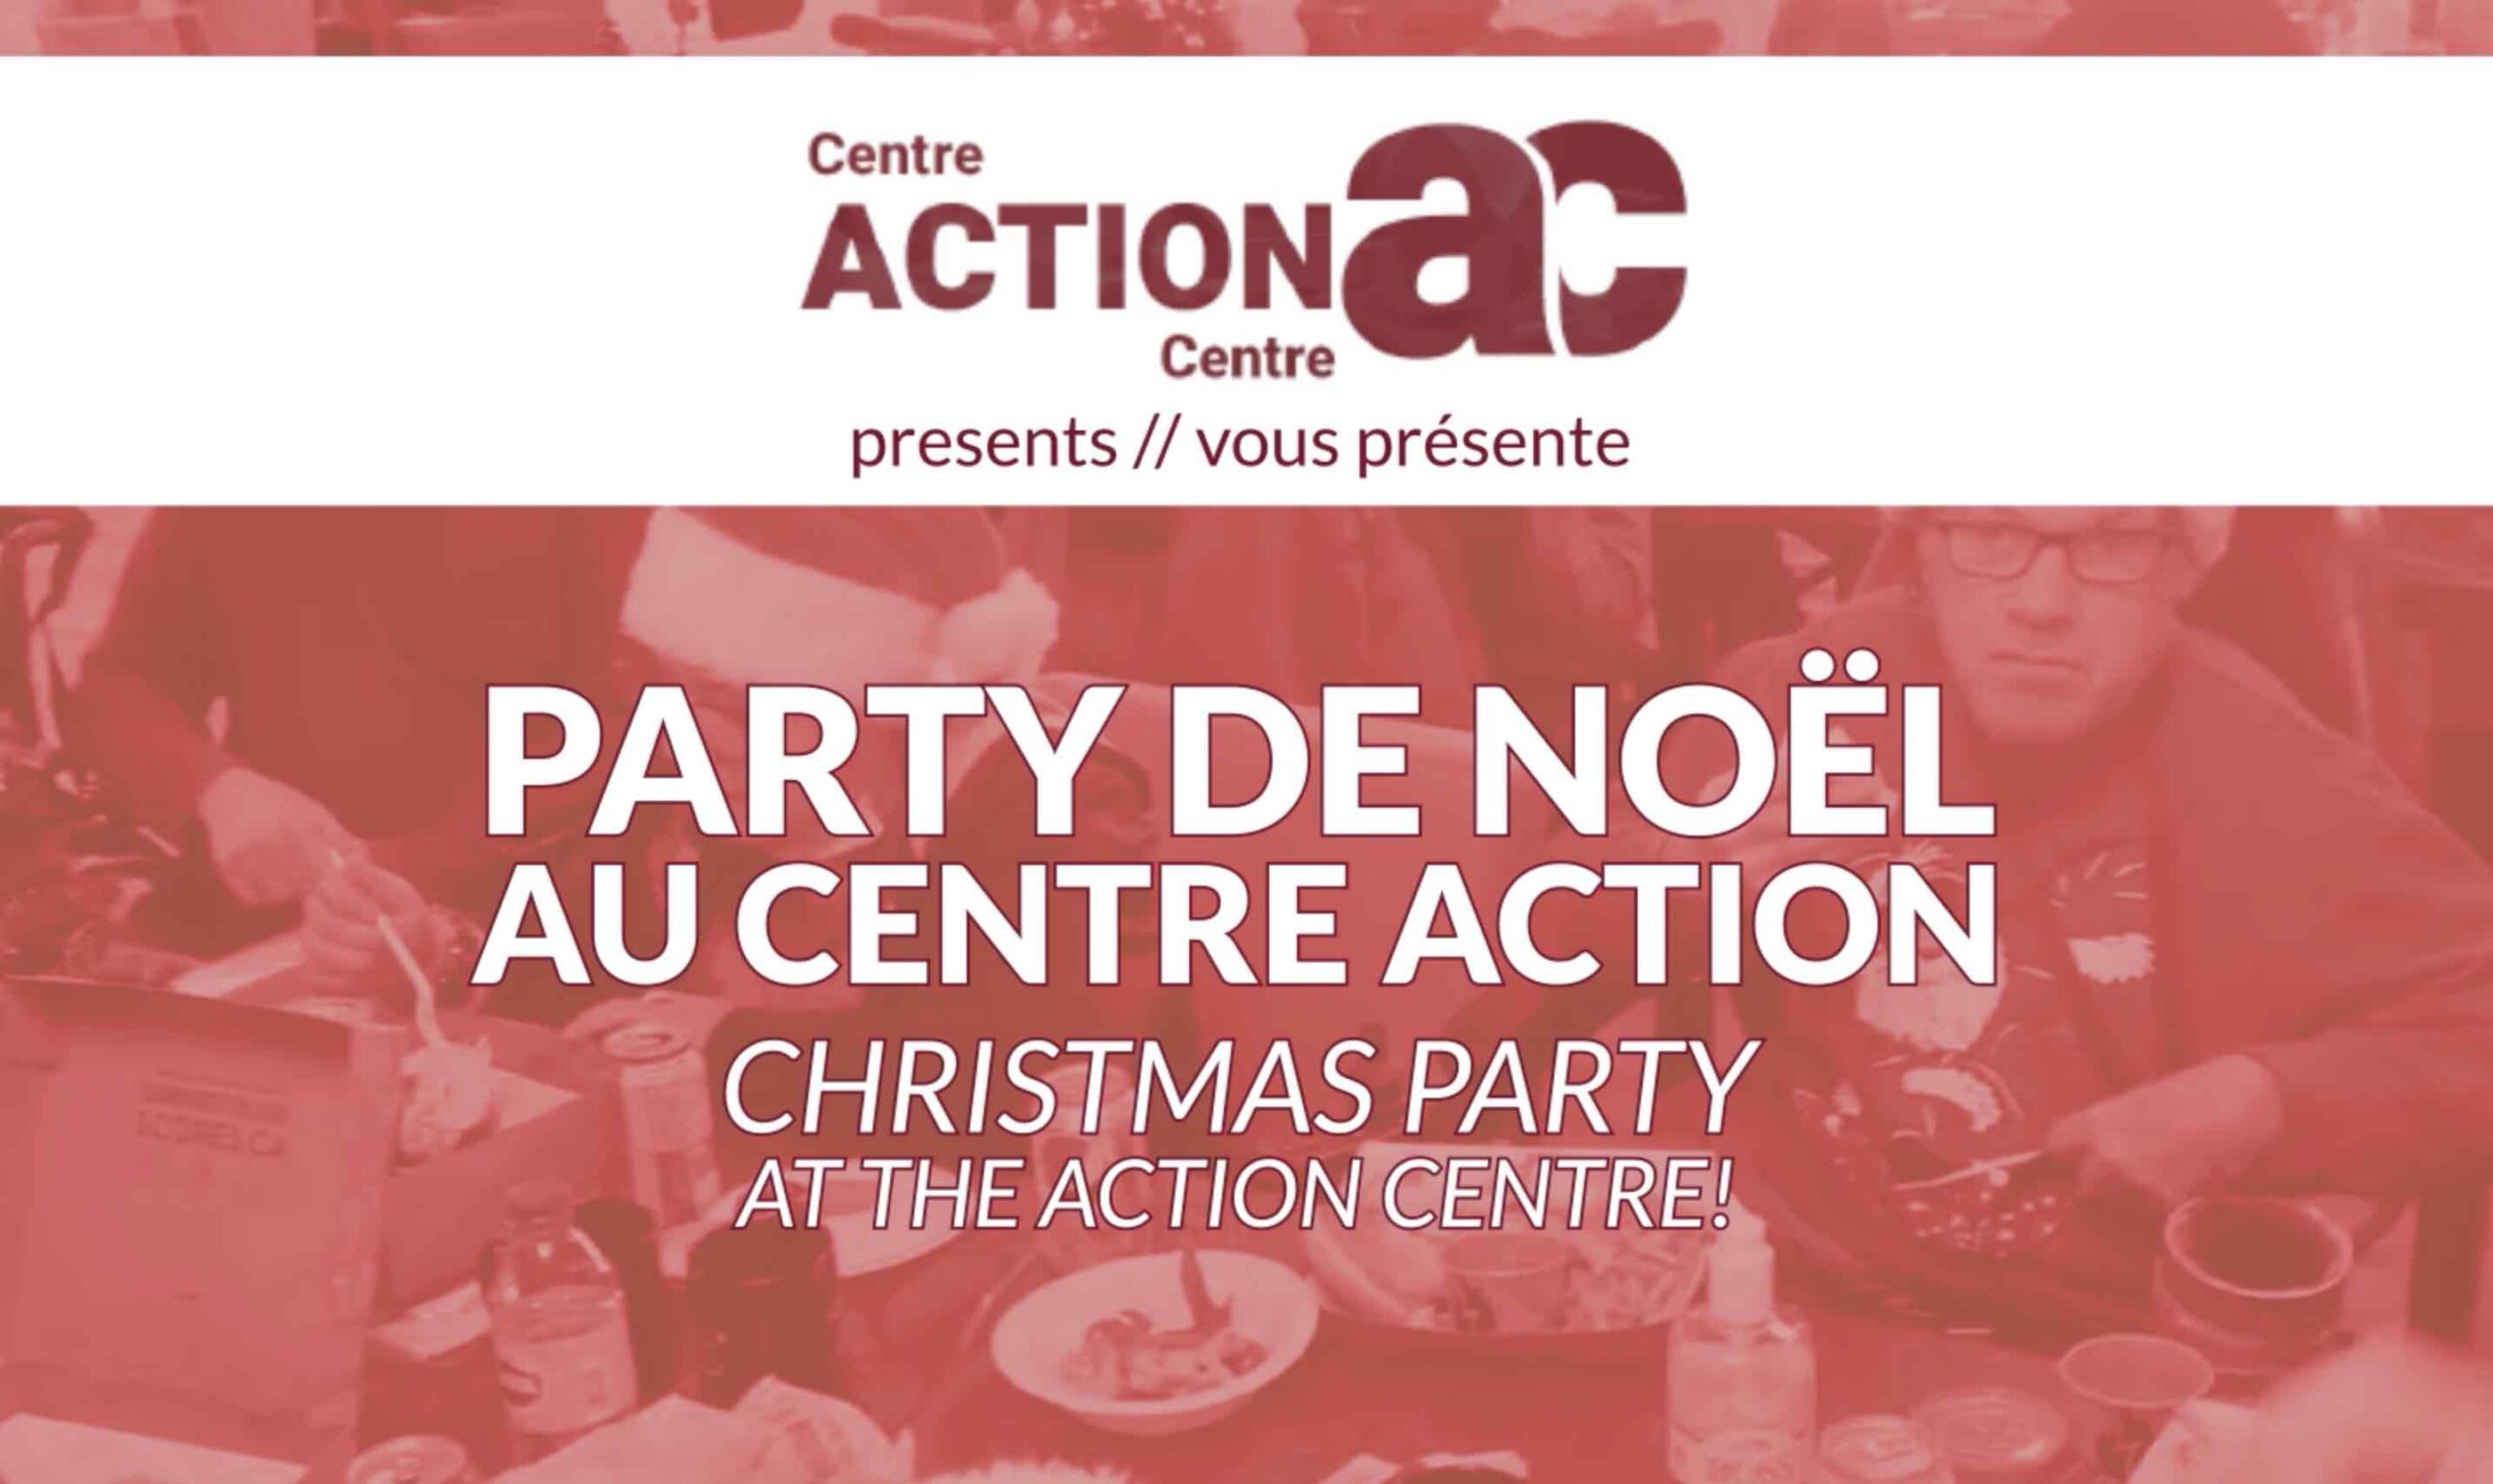 Christmas Party at the Action Centre